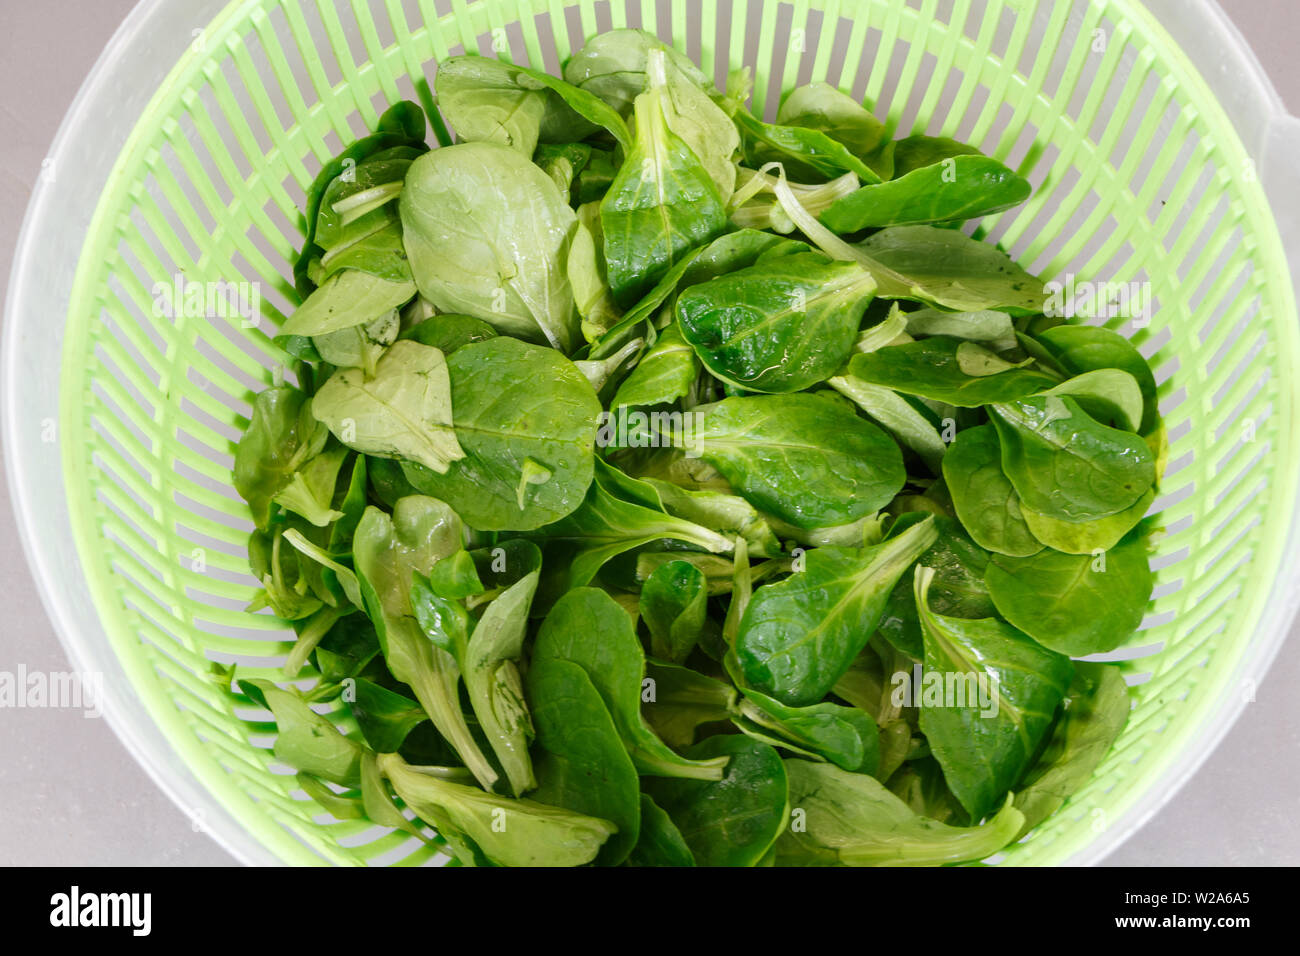 Lamb's lettuce in a salad spinner after washing it with water Stock Photo